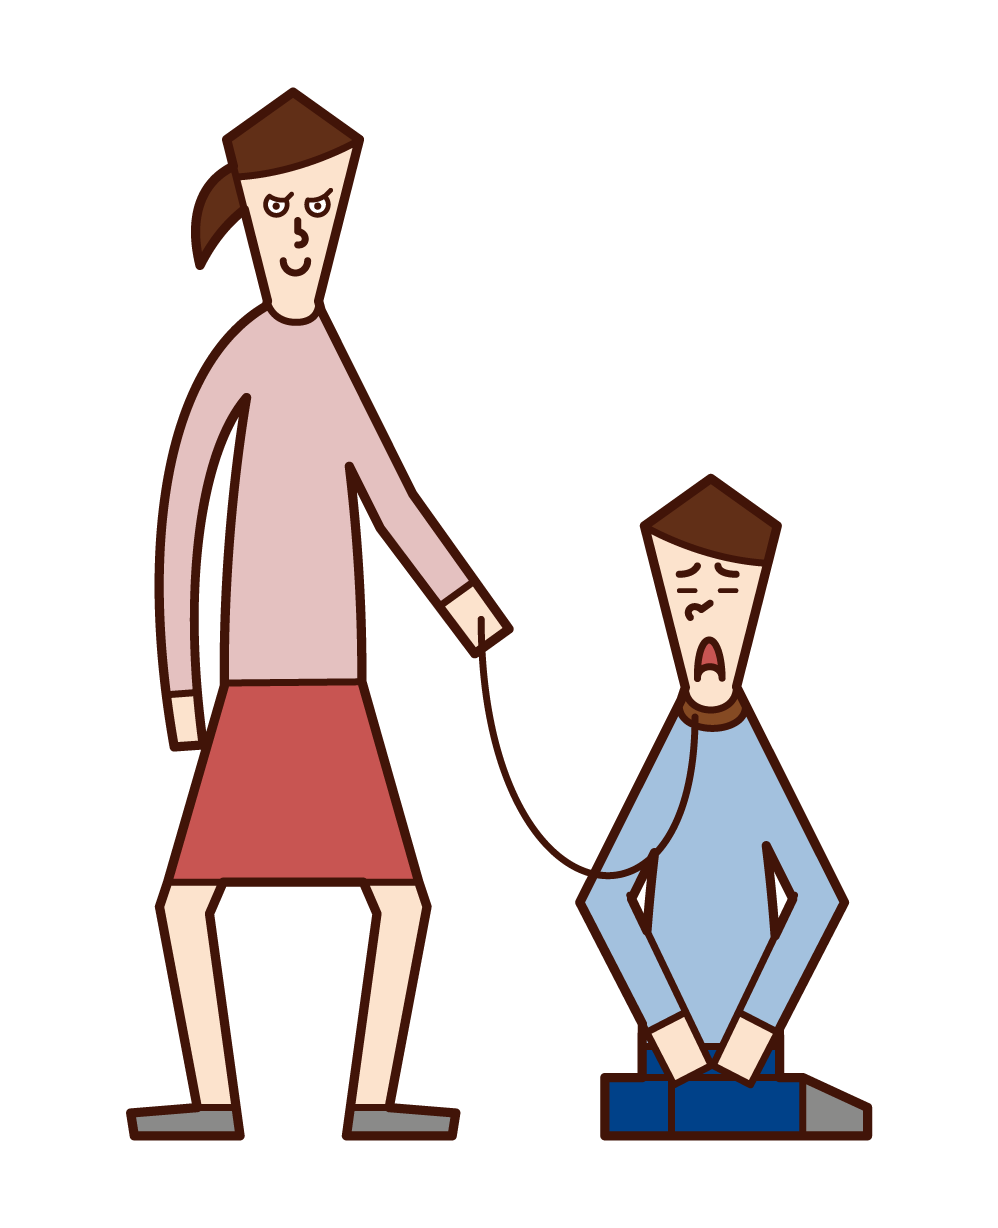 Illustration of a person (female) who submits a man